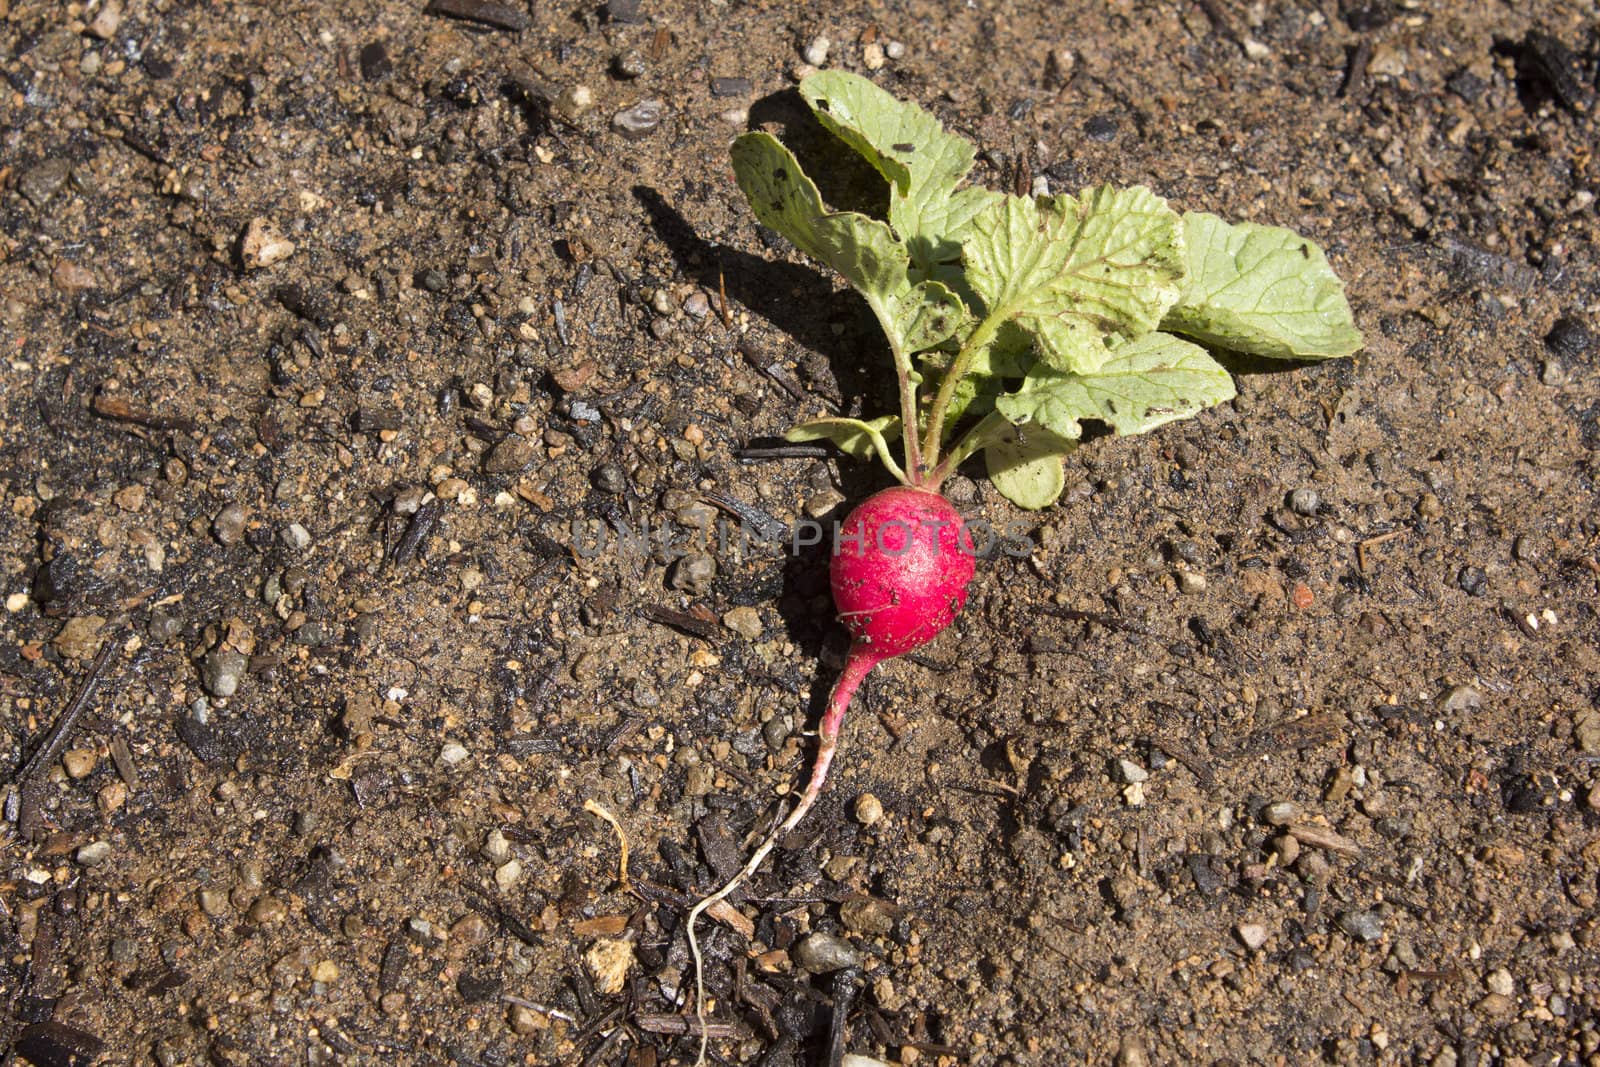 Radish in the garden freshly picked and laying on the dirt